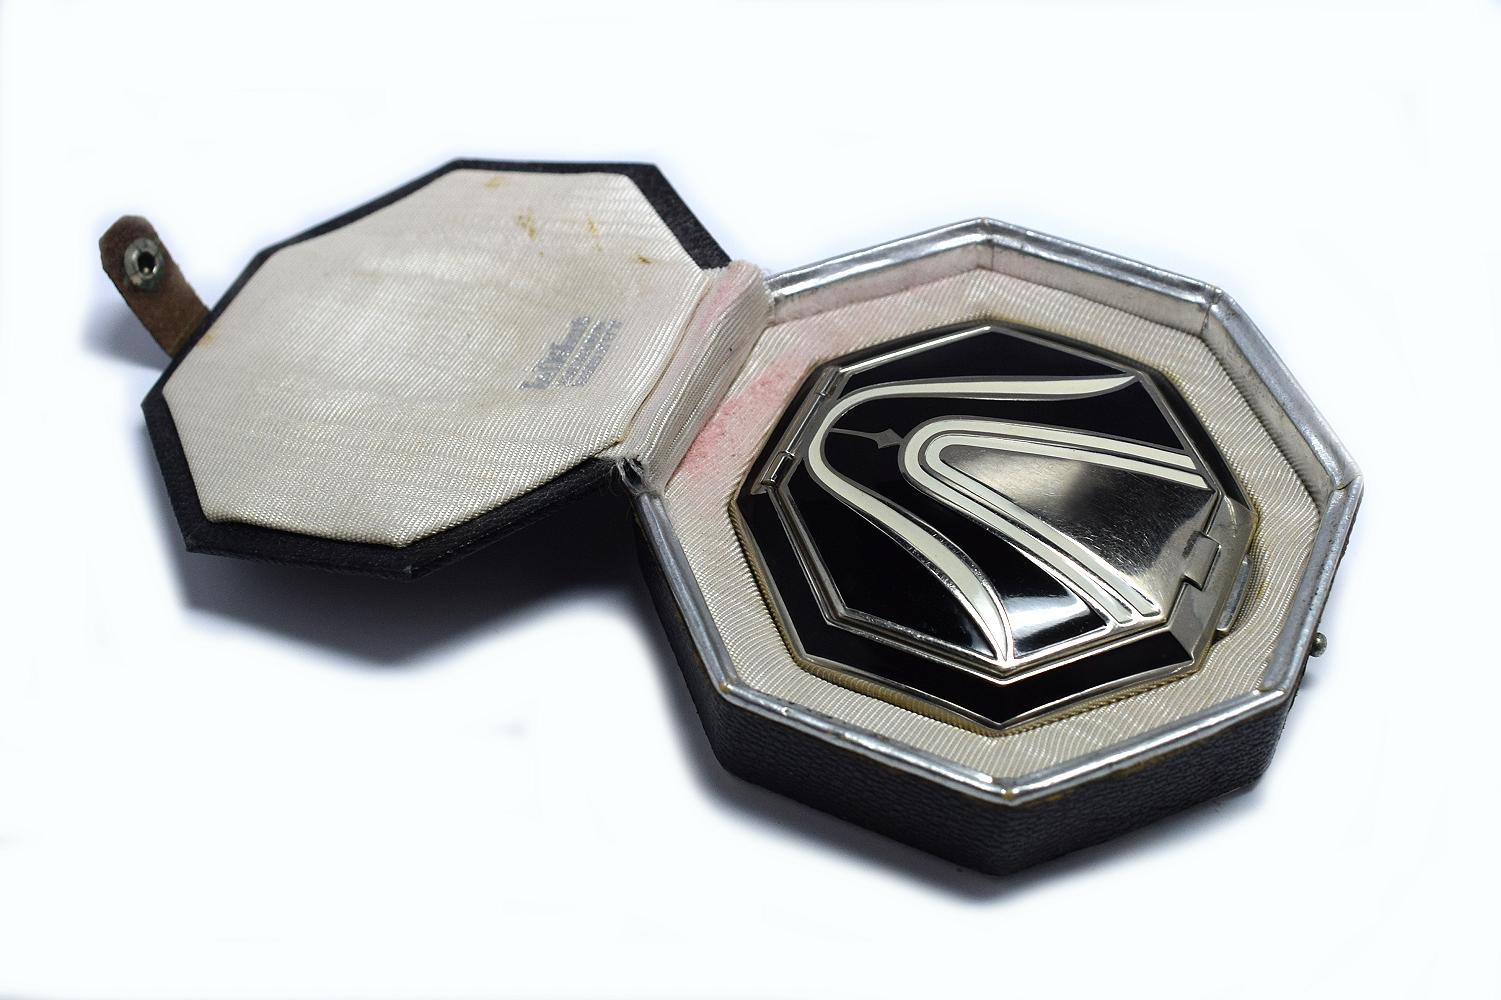 An Art Deco Richard Hudnut Le Debut 'Tulip' compact of octagonal form, with black and ivory colored enamelled decoration, fitted in original black leatherette box with paper label. Designed for Richard Hudnuts Deauville Line, the rouge and makeup